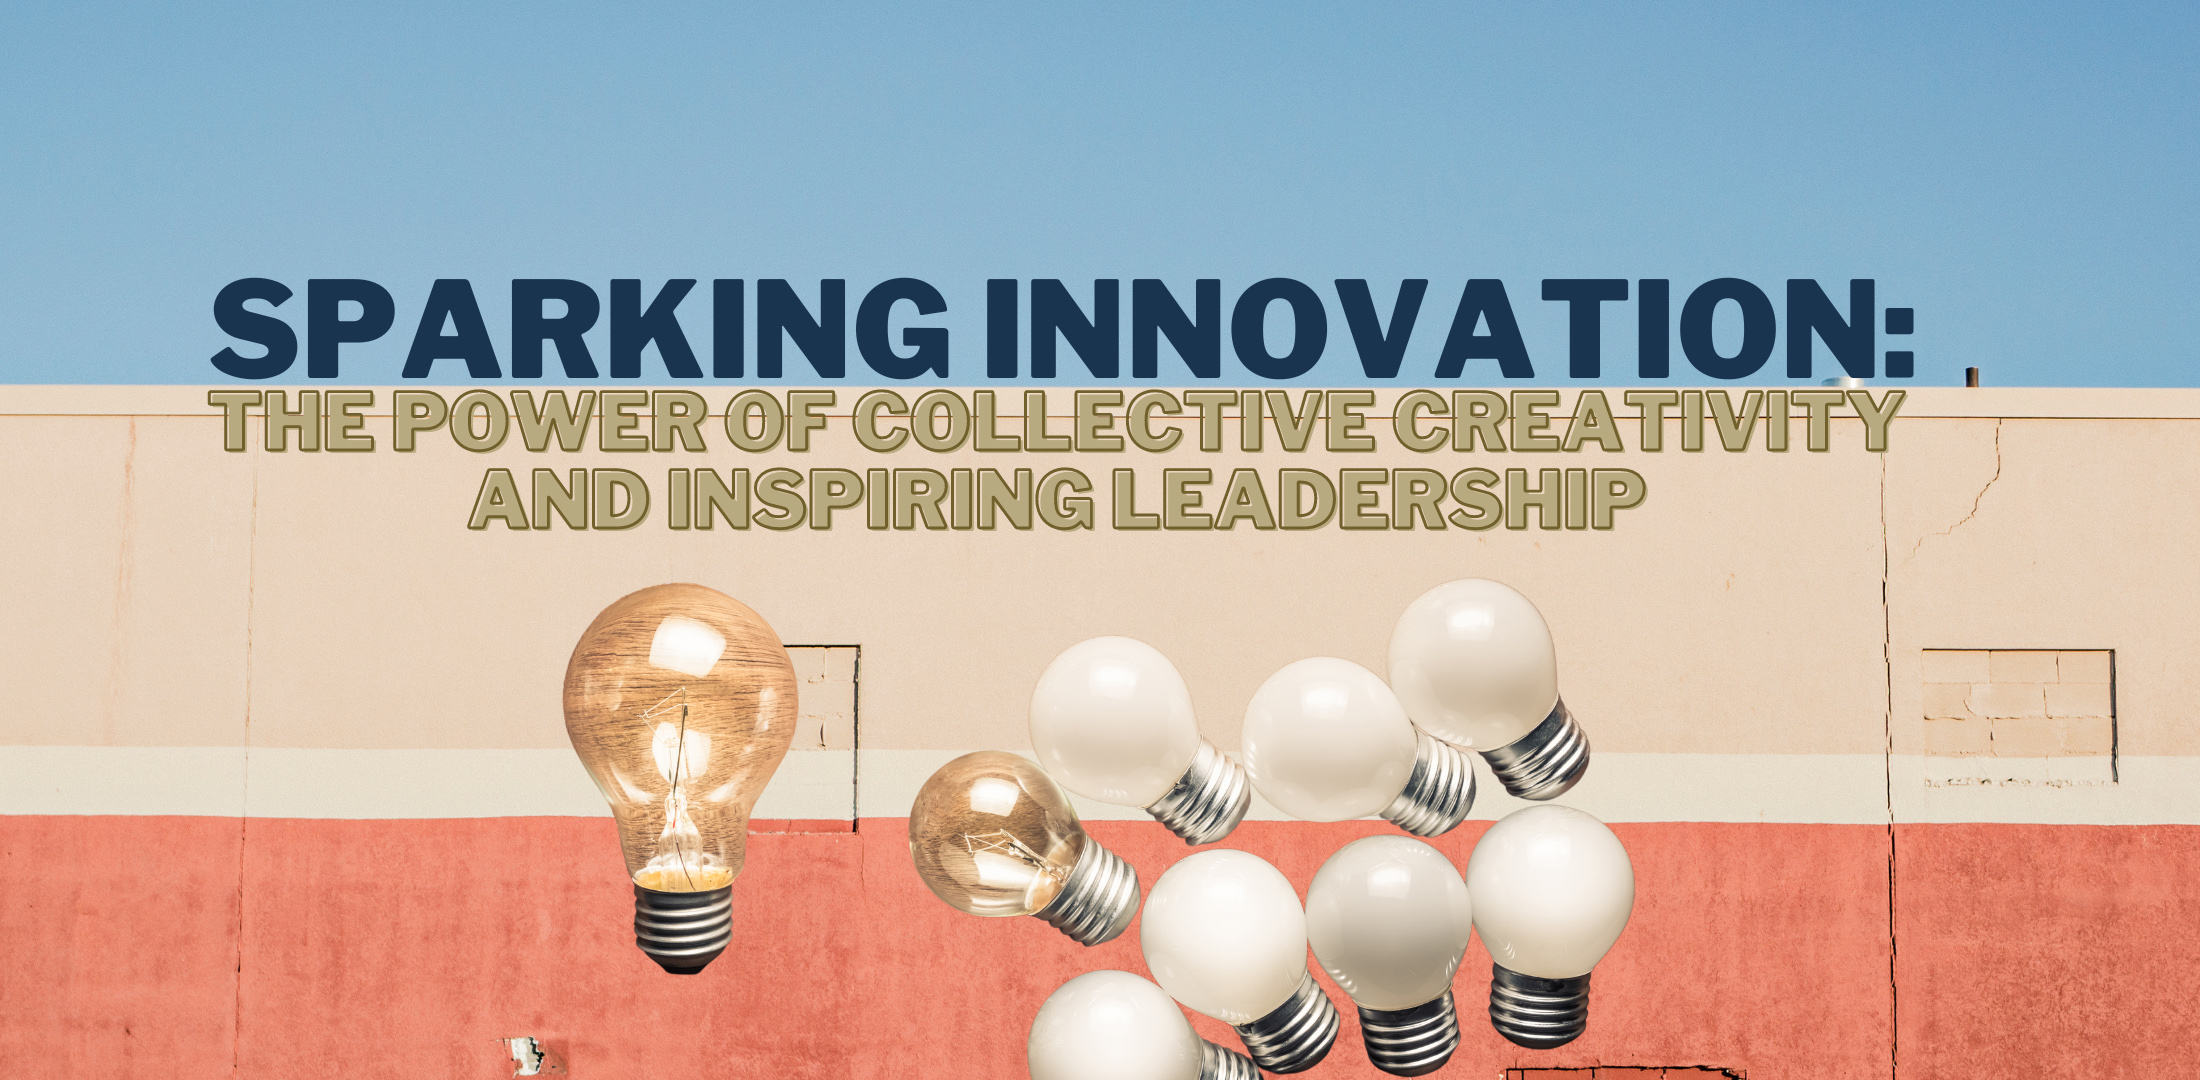 Sparking Innovation: The Power of Collective Creativity and Inspiring Leadership